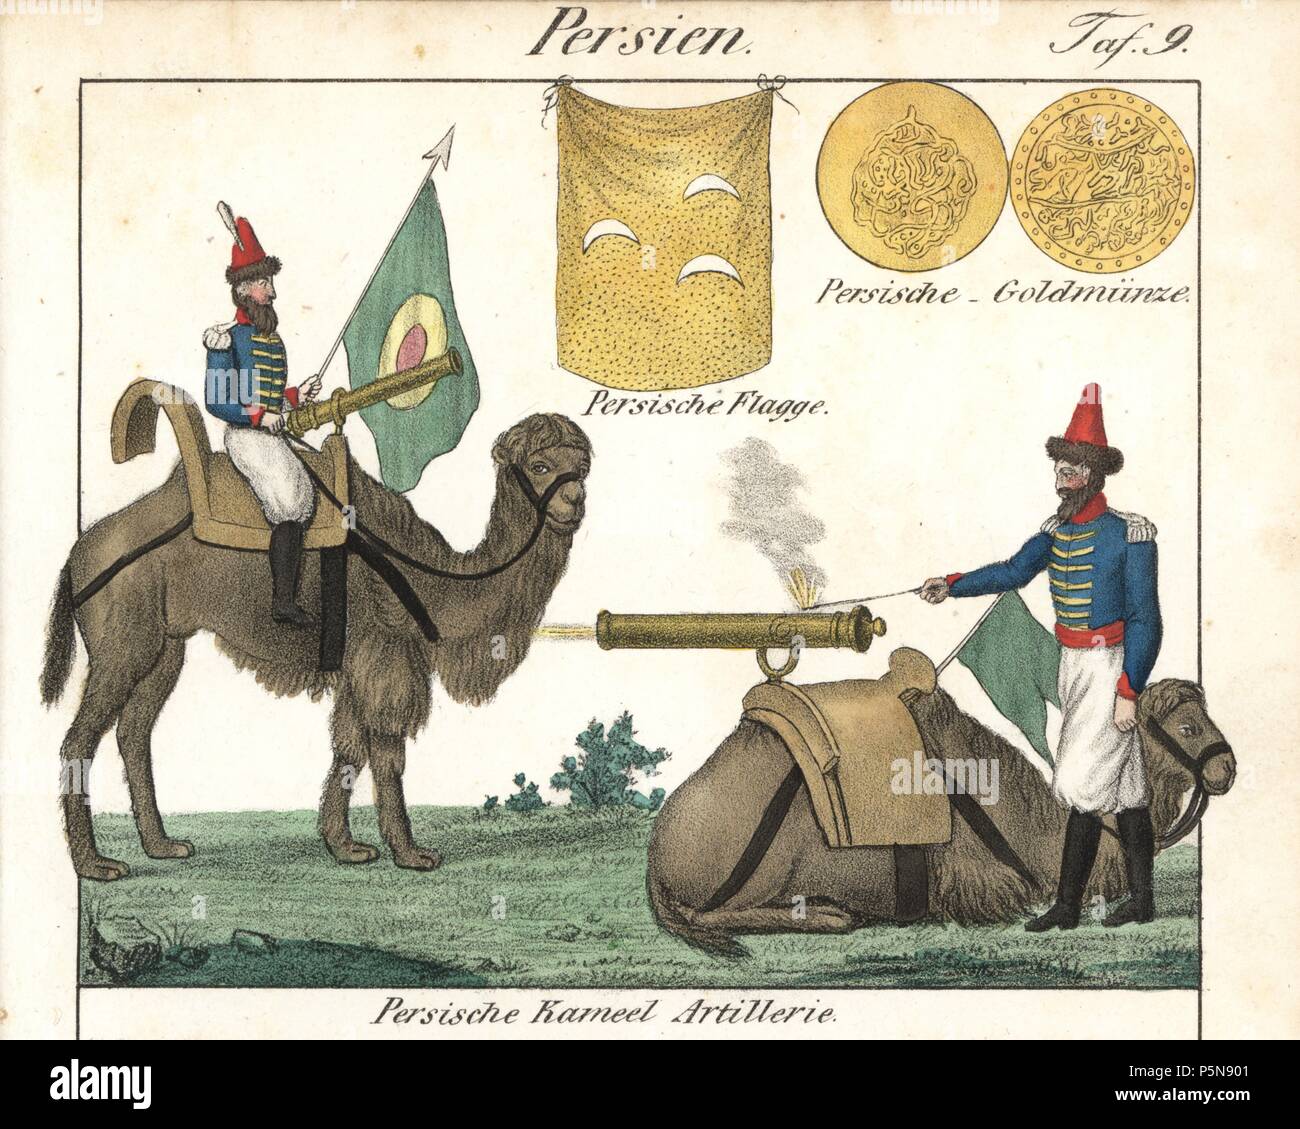 Persian camel artillery showing bombardiers firing cannons mounted on saddles. Persian flag and gold coins. Handcoloured lithograph from Friedrich Wilhelm Goedsche's 'Vollstaendige Völkergallerie in getreuen Abbildungen' (Complete Gallery of Peoples in True Pictures), Meissen, circa 1835-1840. Goedsche (1785-1863) was a German writer, bookseller and publisher in Meissen. Many of the illustrations were adapted from Bertuch's 'Bilderbuch fur Kinder' and others. Stock Photo